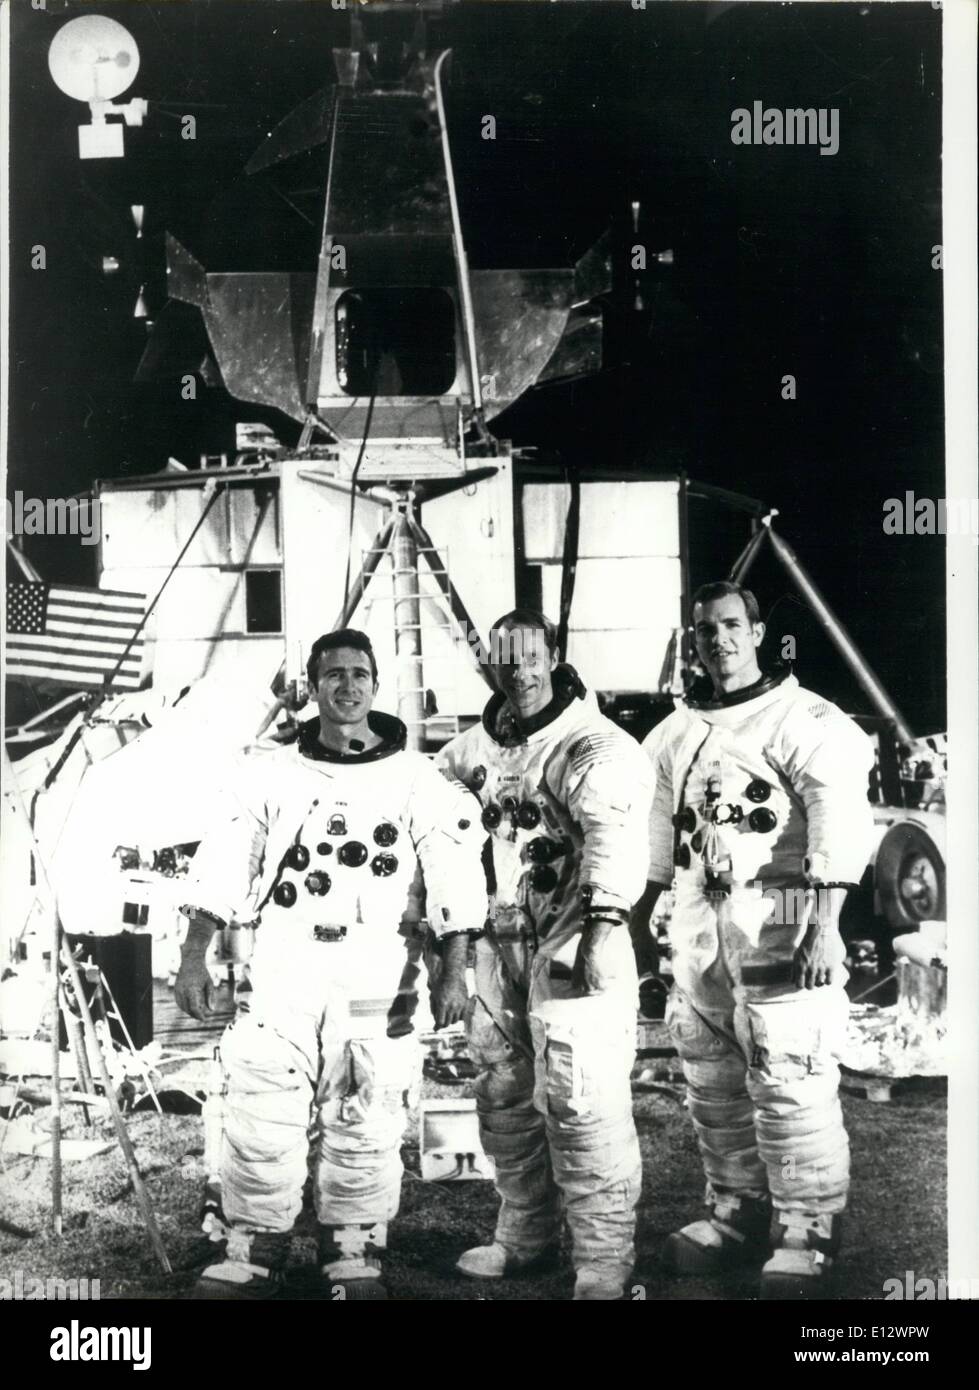 Feb. 26, 2012 - Preparing for Apollo 15 Moon Mission; Preparation are going ahead for the Apollo 15 Mission by American astronauts in July. Photo Shows American Apollo 15 astronauts (L to R); James Irwin, Alfred Worden and David Scott. Stock Photo